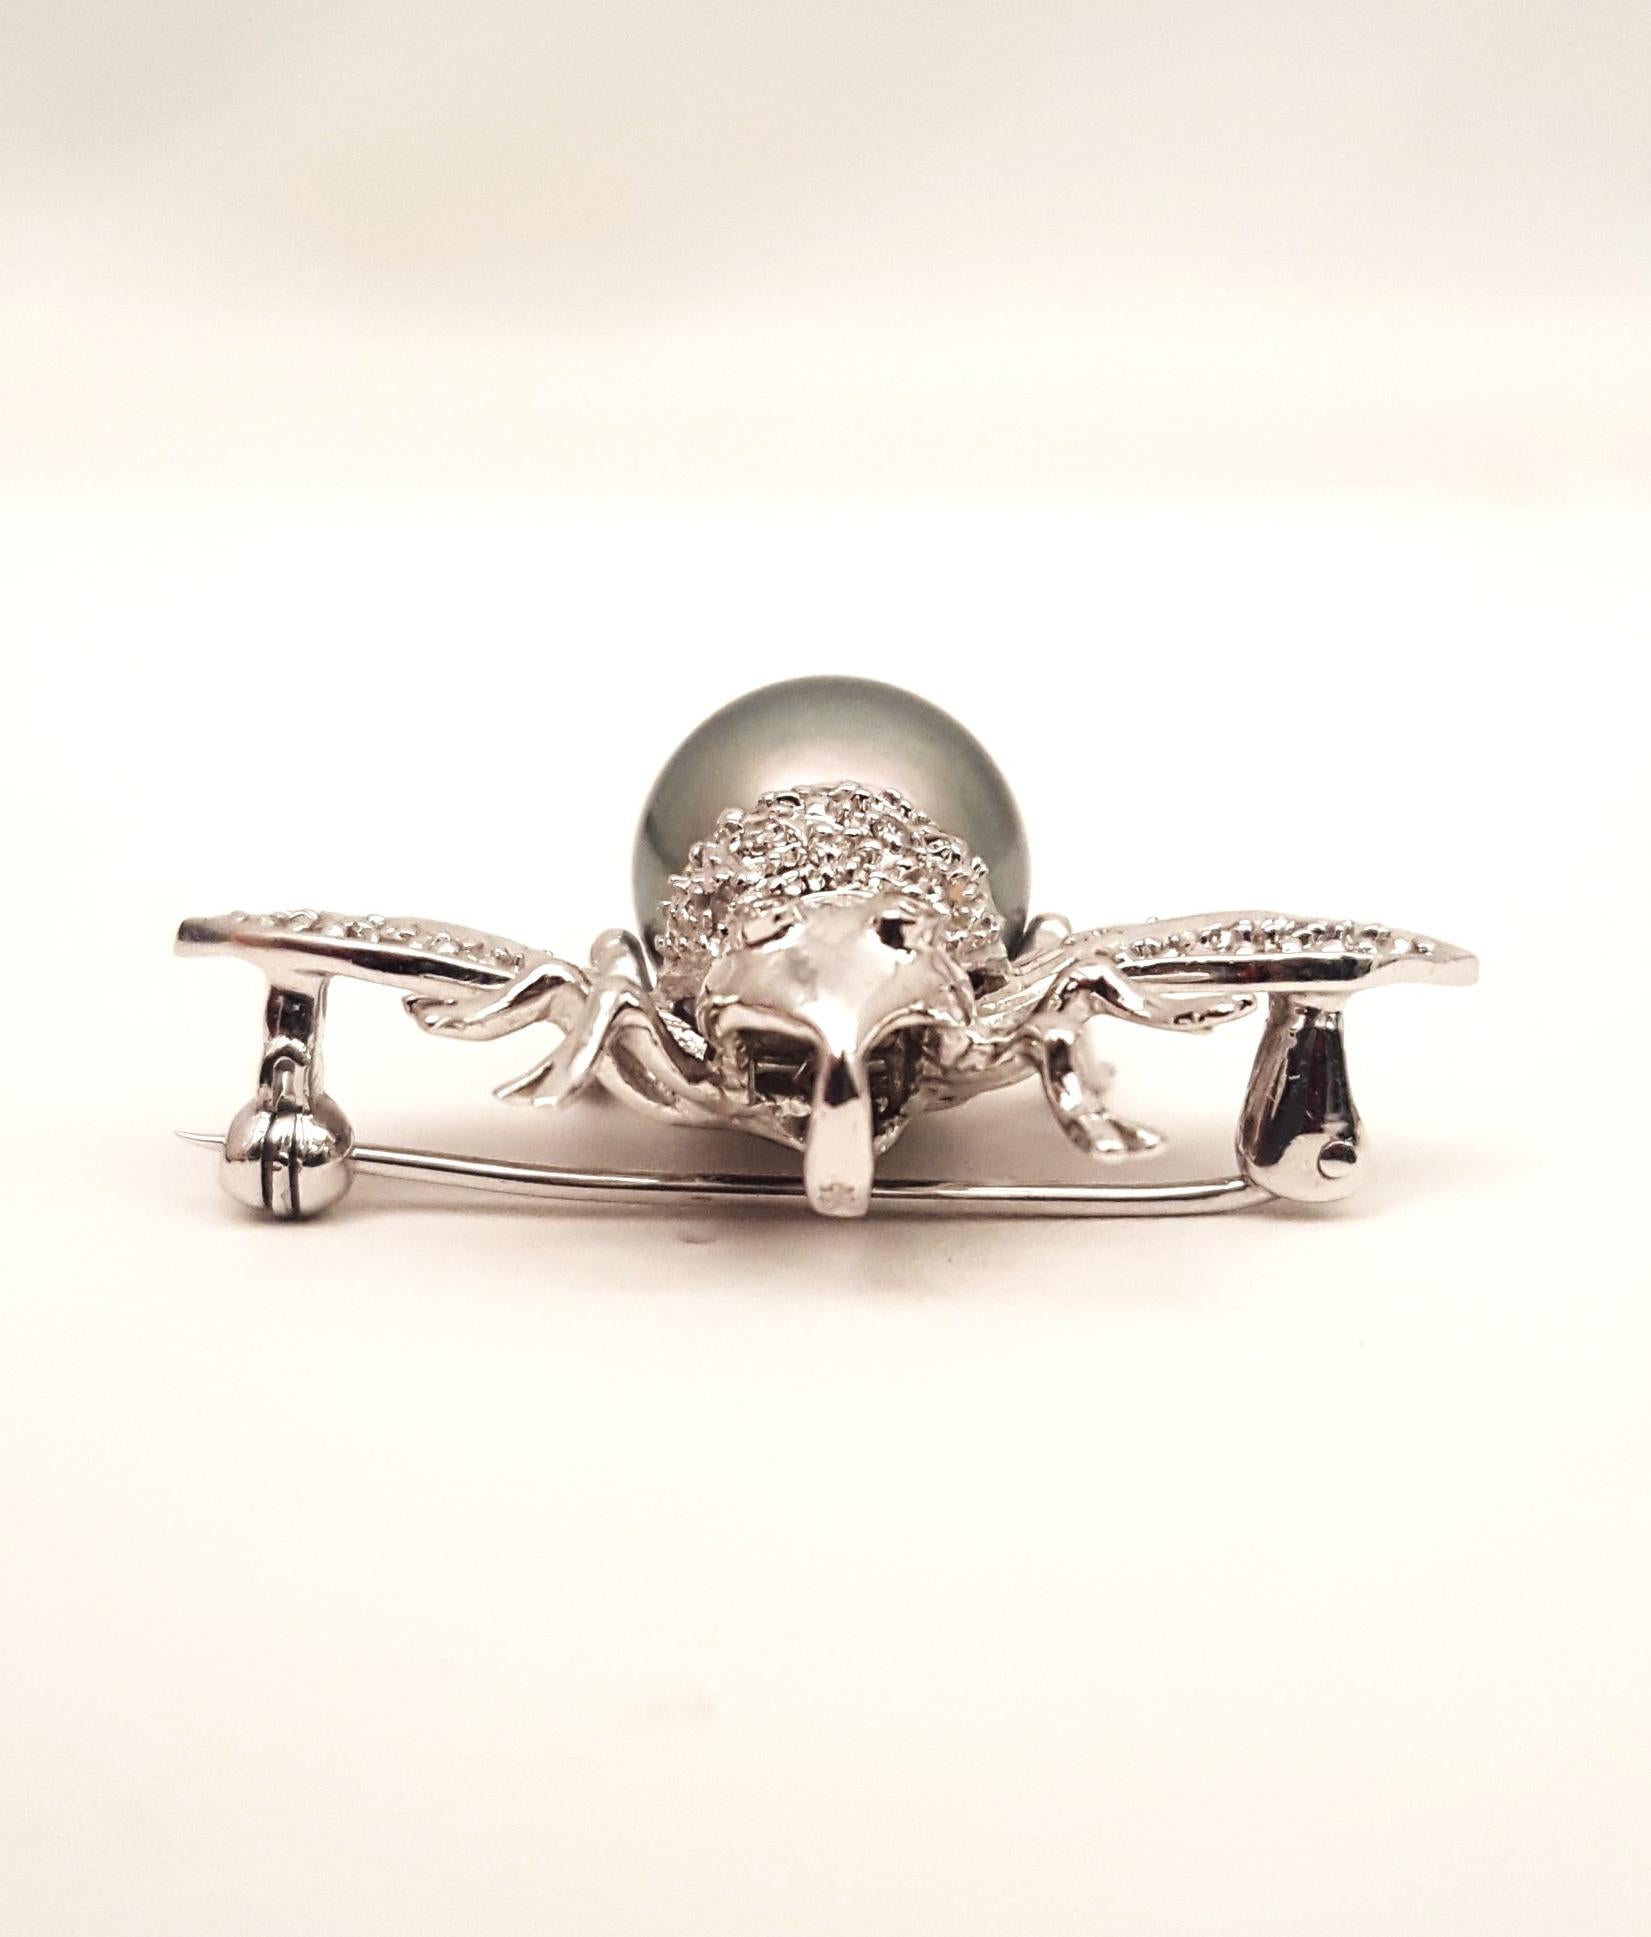 Contemporary 14 Karat White Gold and Sterling Silver Faux Pearl and Diamond Bee Brooch